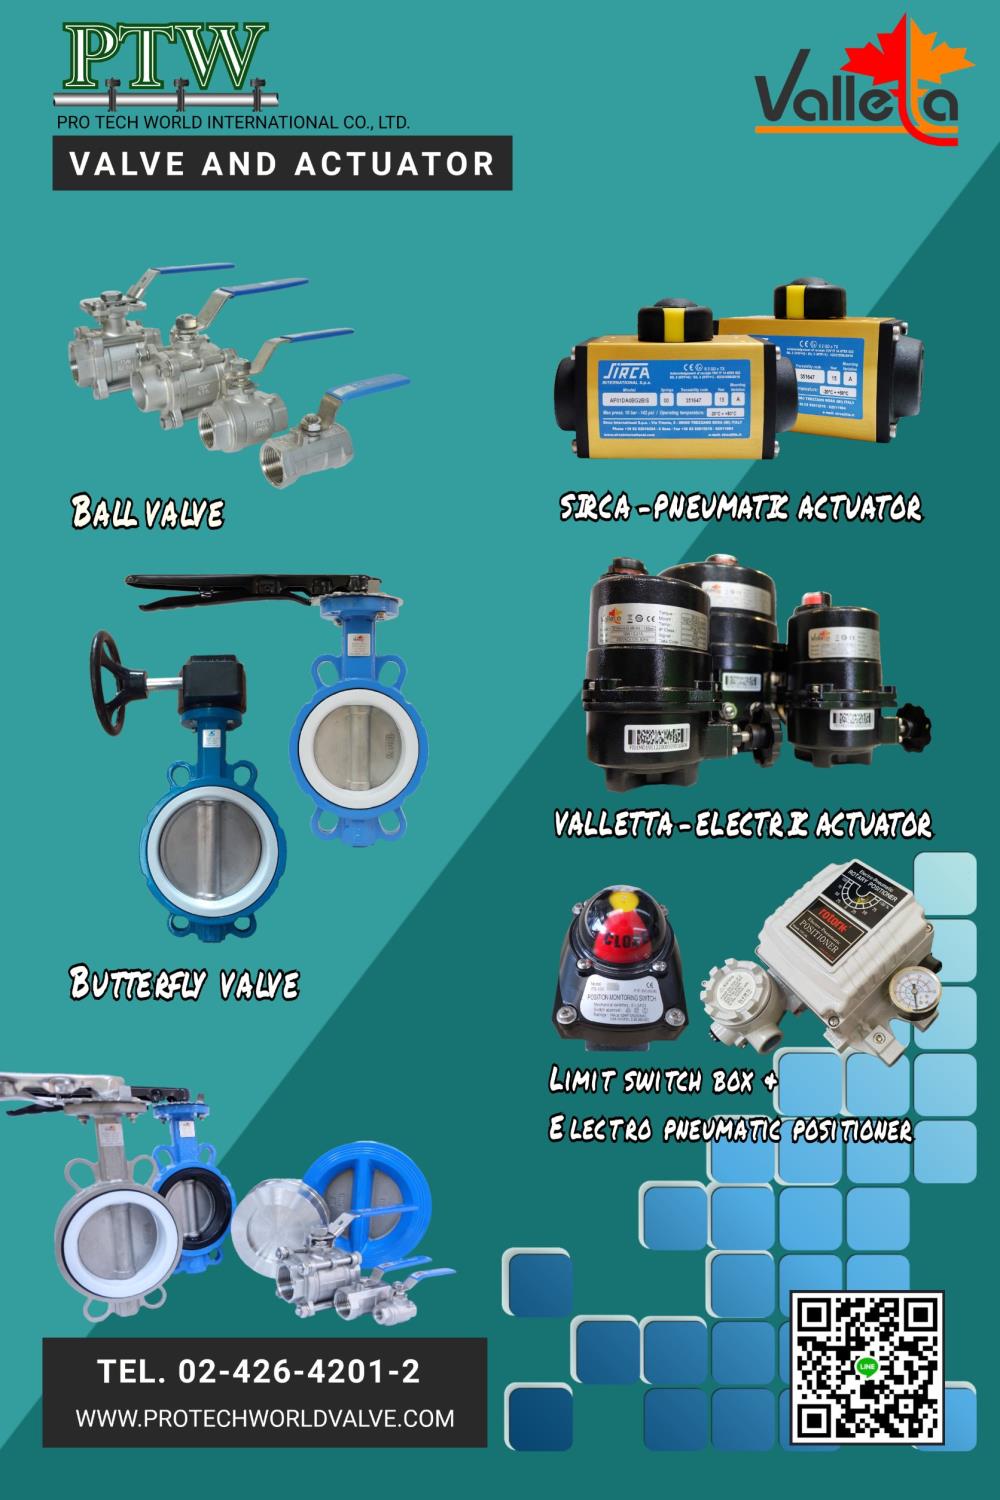 PTW- Valve and Actuator,Electric actuator, Ball valve, Butterfly valve, Pneumatic actuator,VALLETTA,Pumps, Valves and Accessories/Valves/General Valves